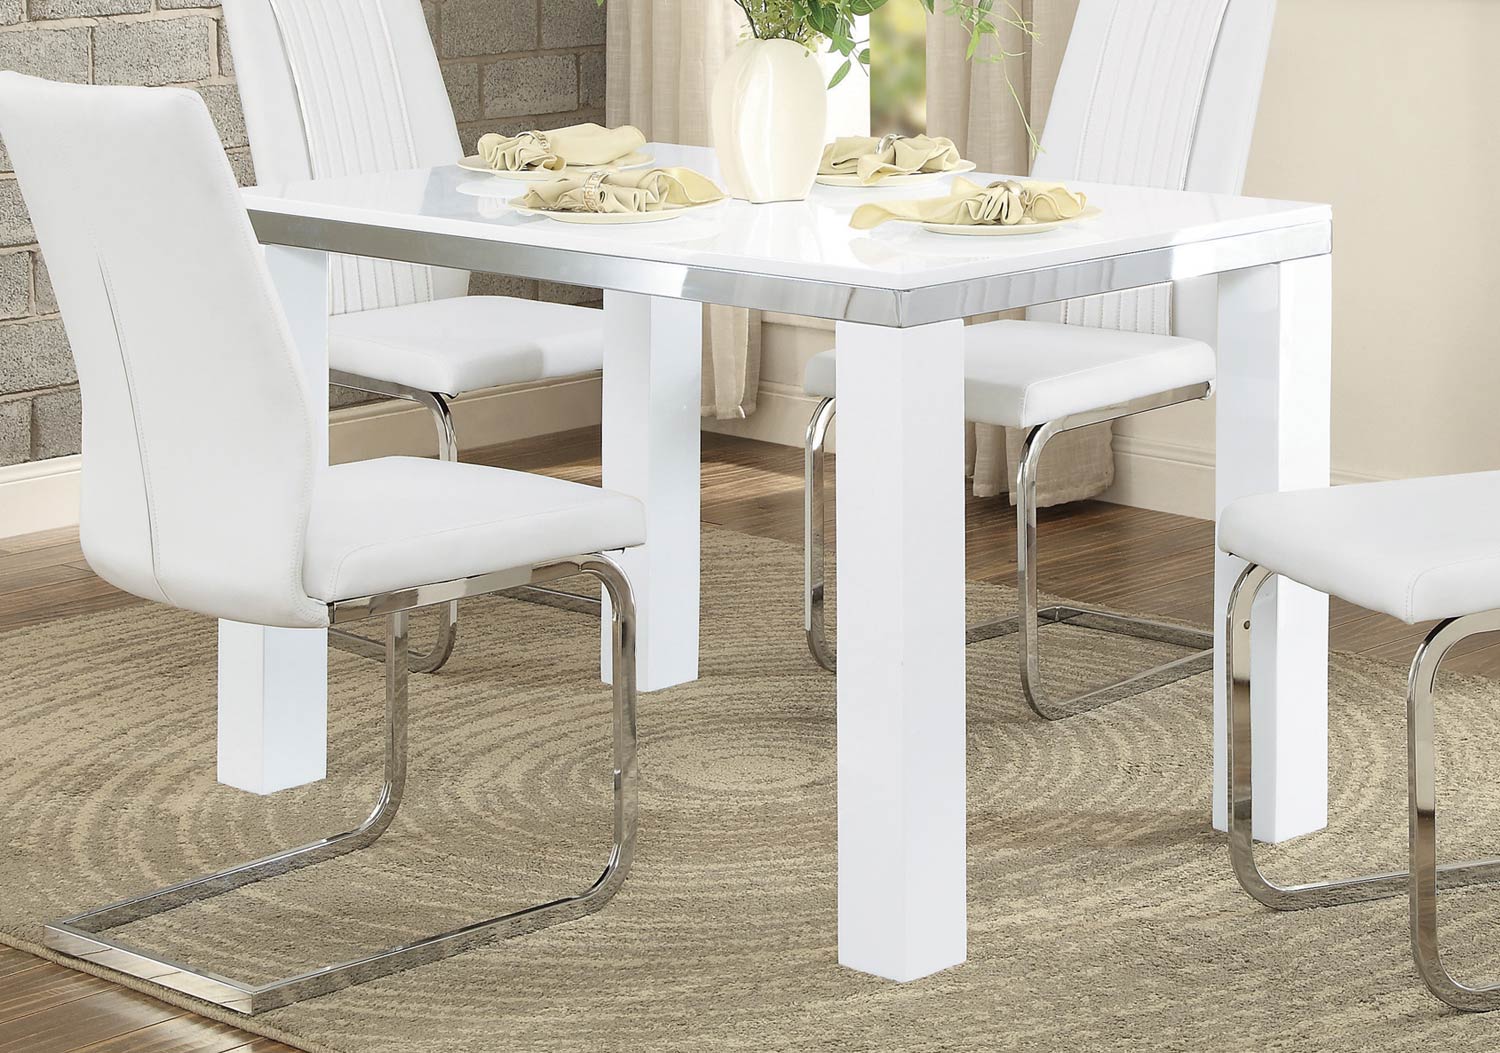 Homelegance Rohme Dining Table - Glossy White/Chrome